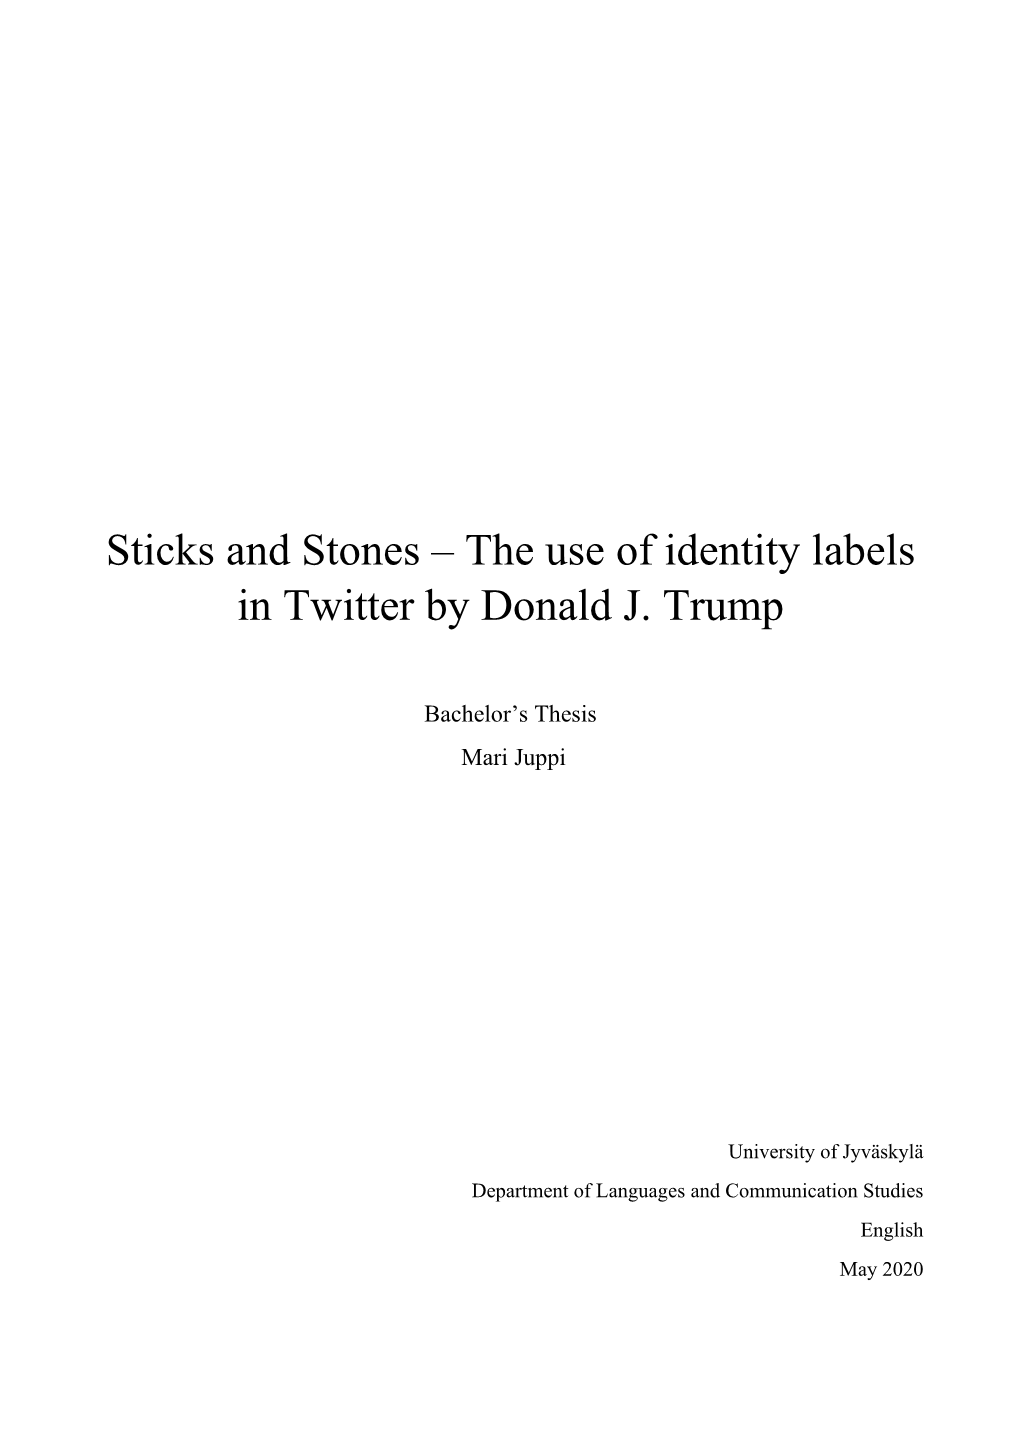 Sticks and Stones – the Use of Identity Labels in Twitter by Donald J. Trump